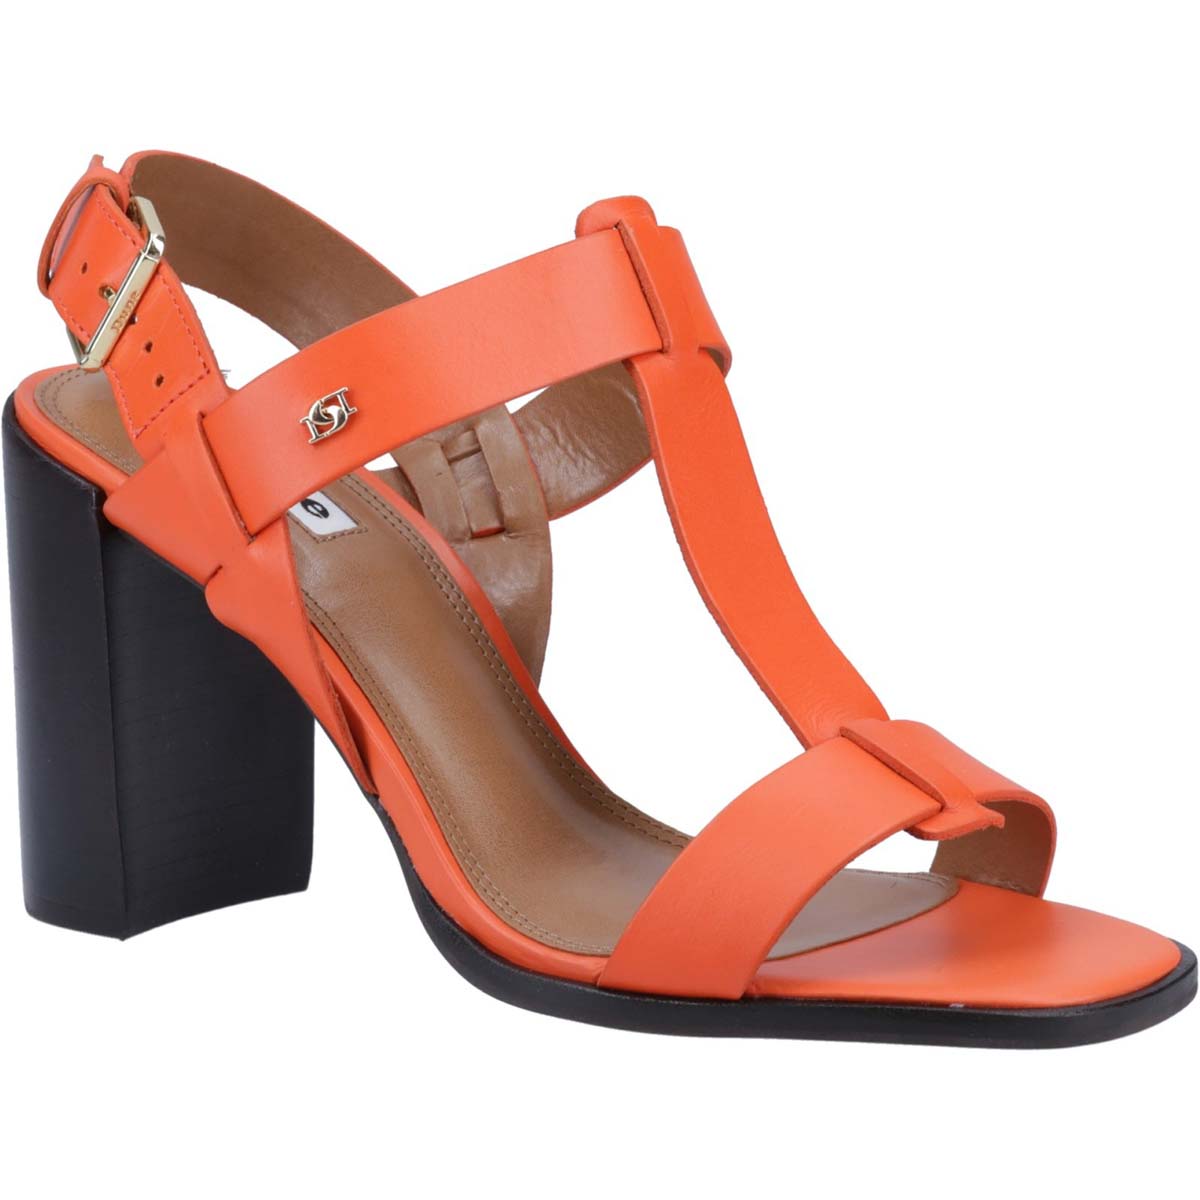 Dune London Jacie Orange Womens Heeled Sandals 8050451004352 in a Plain Leather in Size 8